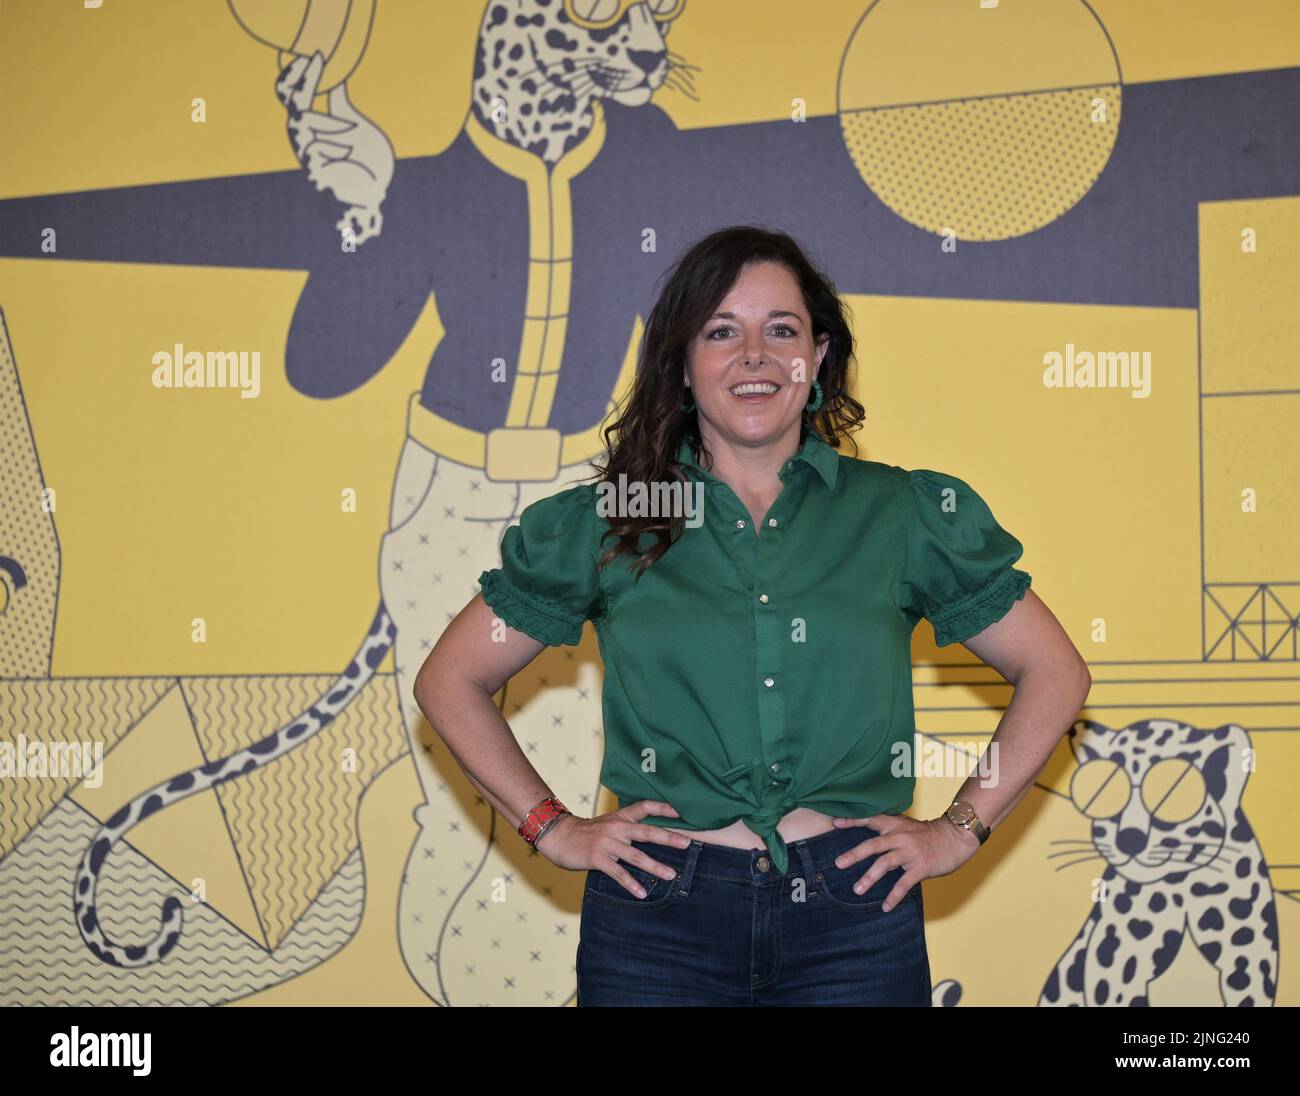 Locarno, Switzerland. 11th Aug, 2022. Locarno, Swiss Locarno Film Festival 2022 ANNIE COLERE photocall film cast, producer In the picture: Laure Calamy actress Credit: Independent Photo Agency/Alamy Live News Stock Photo